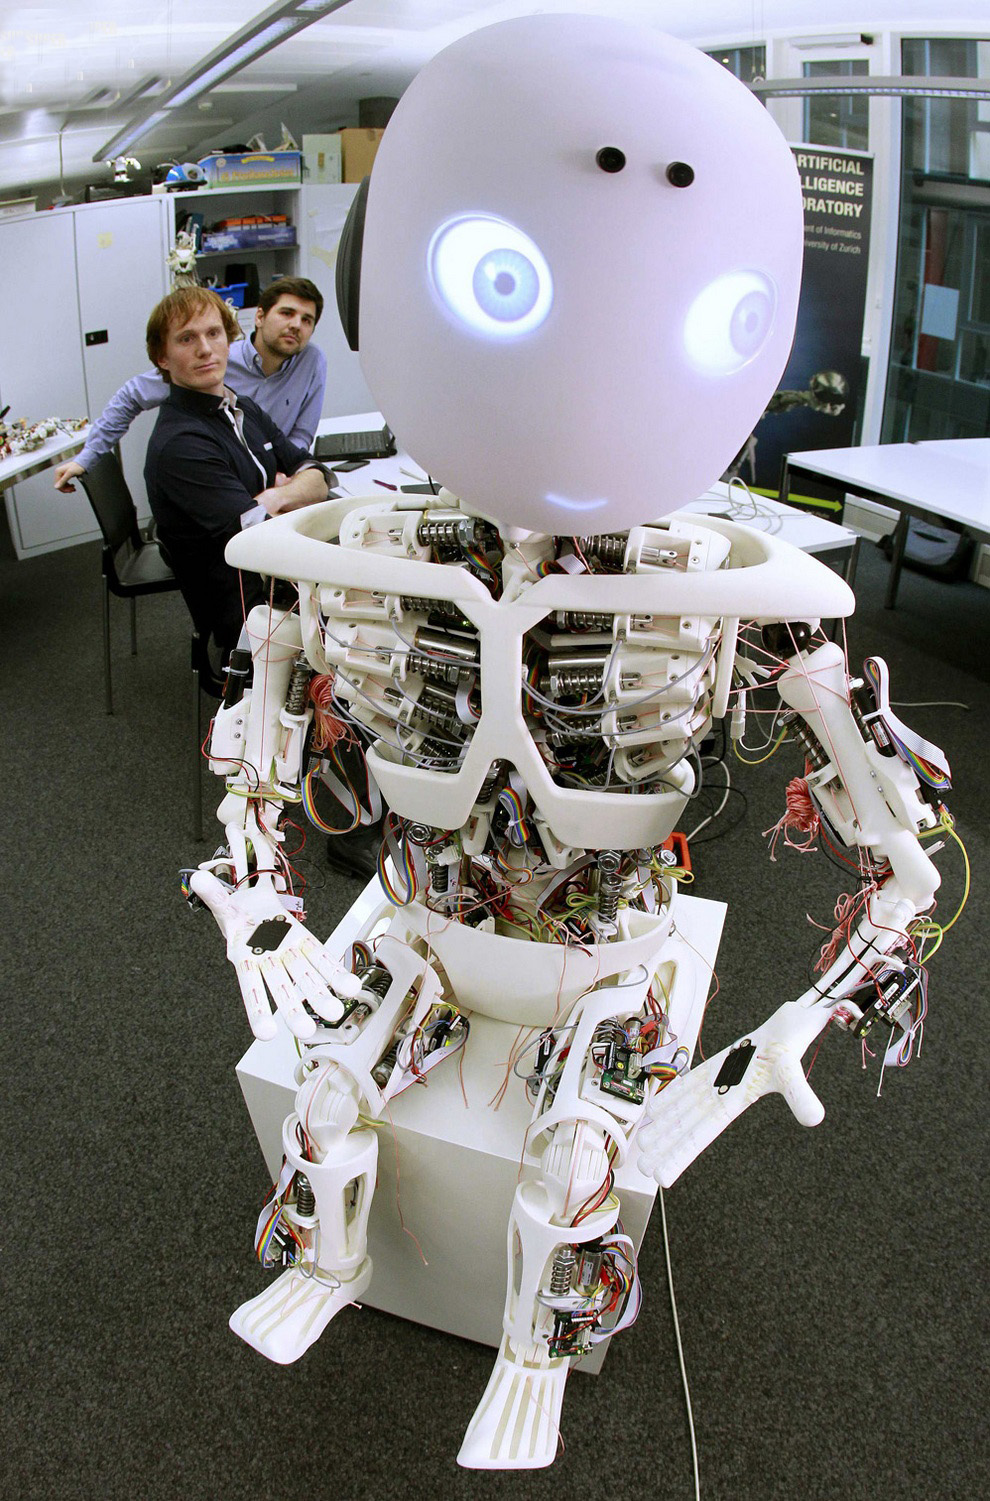 Roboy, the Most Humanoid Robot in the World